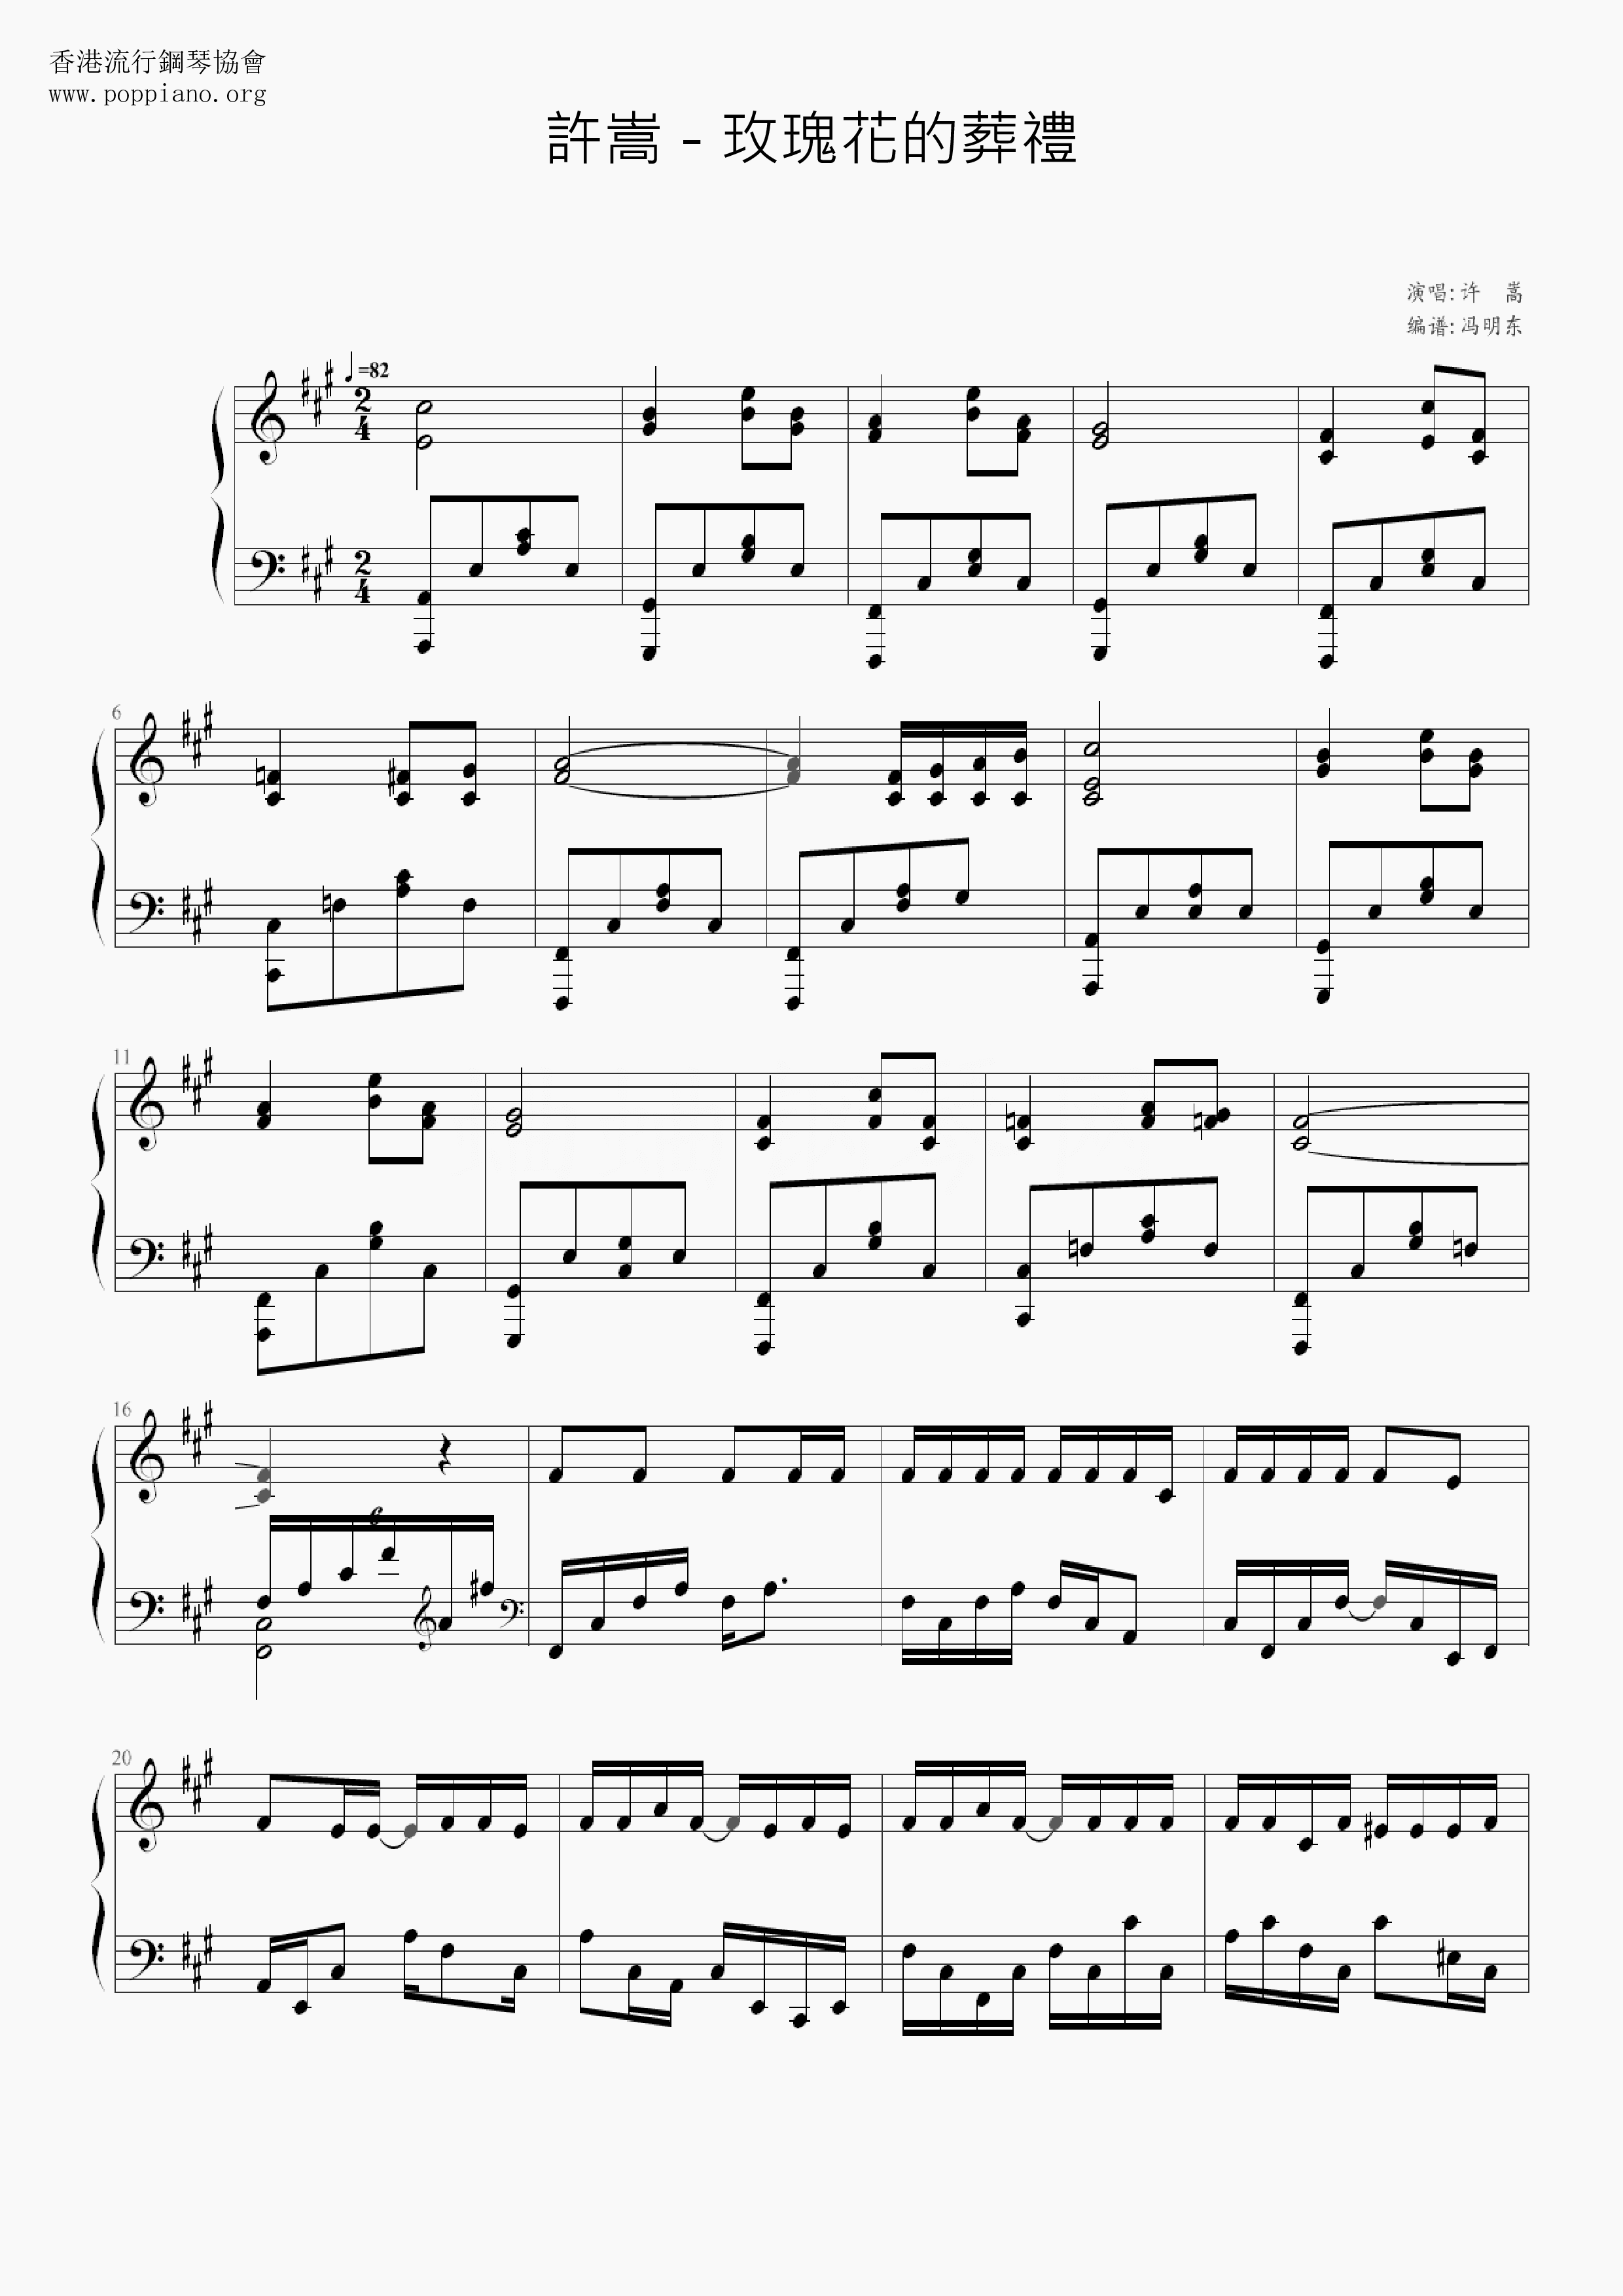 The Funeral Of Roses Score